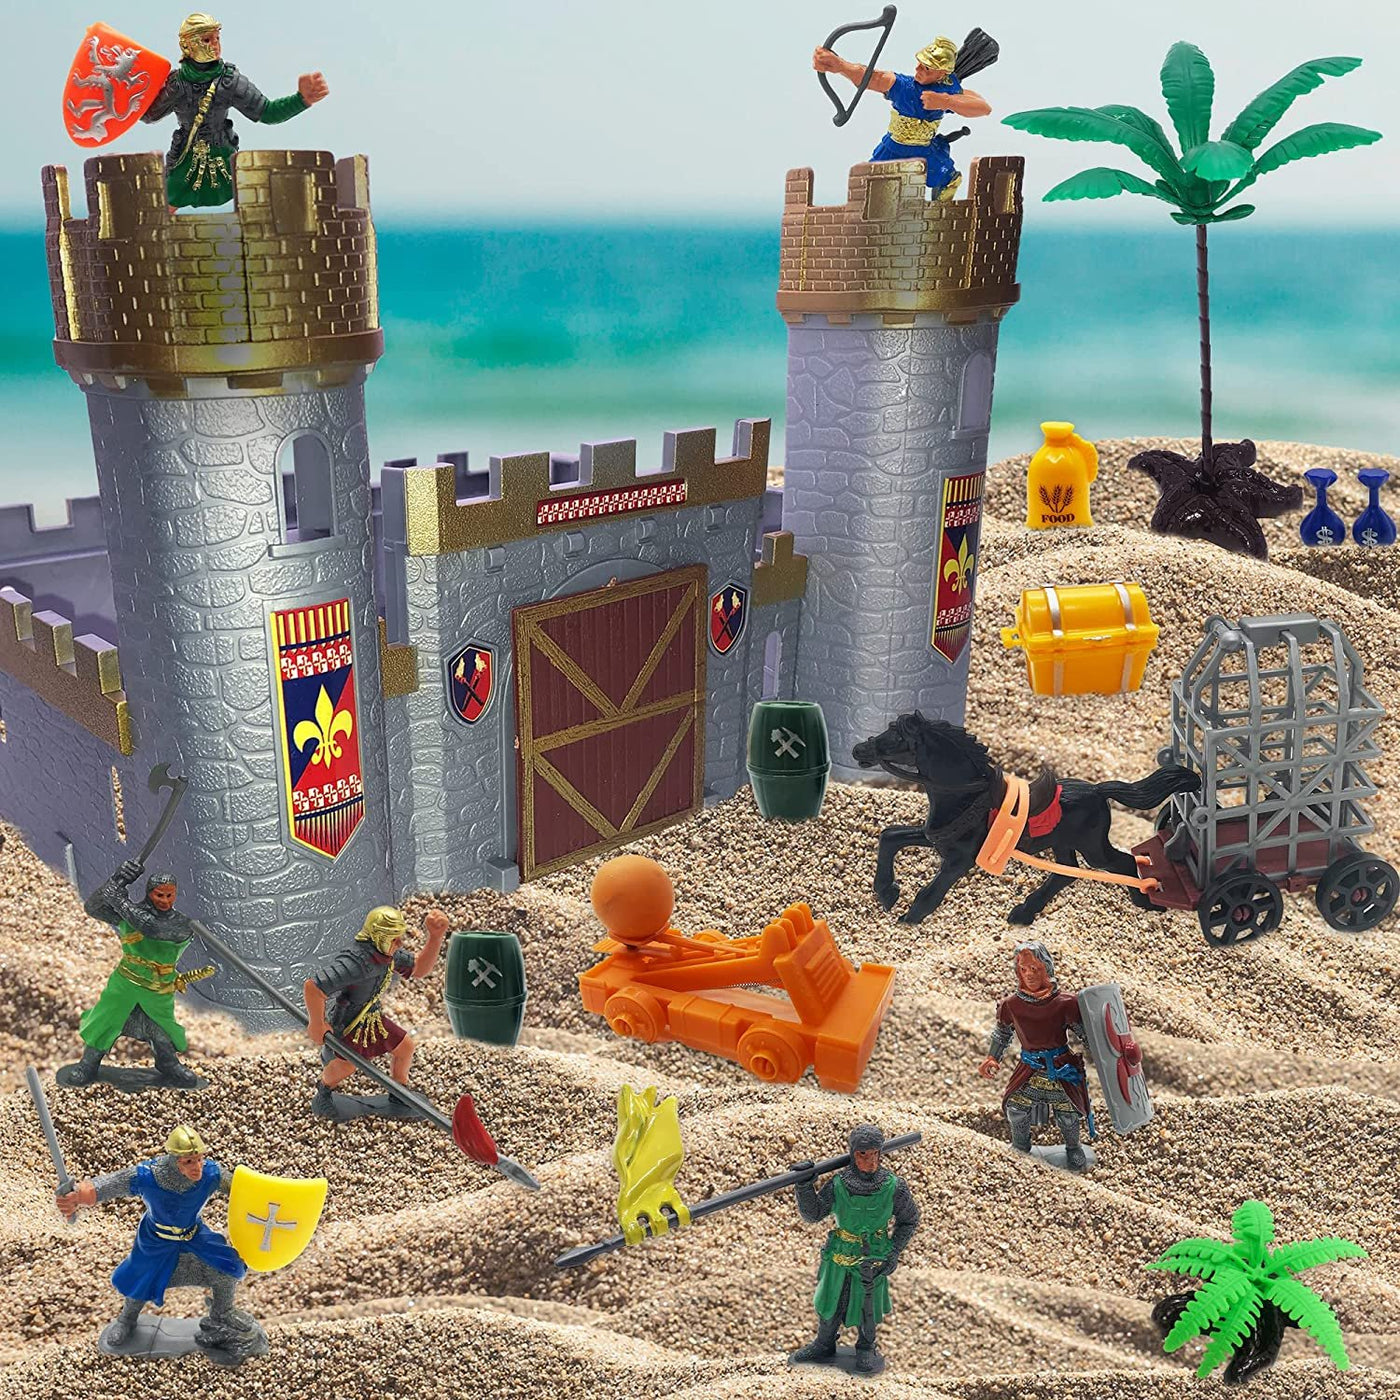 Medieval Castle Knights Playset for Kids, 27-Piece Deluxe Action Figure Play Set with Storage Bucket, Assembly Castle, 6 Knight Action Figures, Horse Drawn Carriage, Catapult, and More